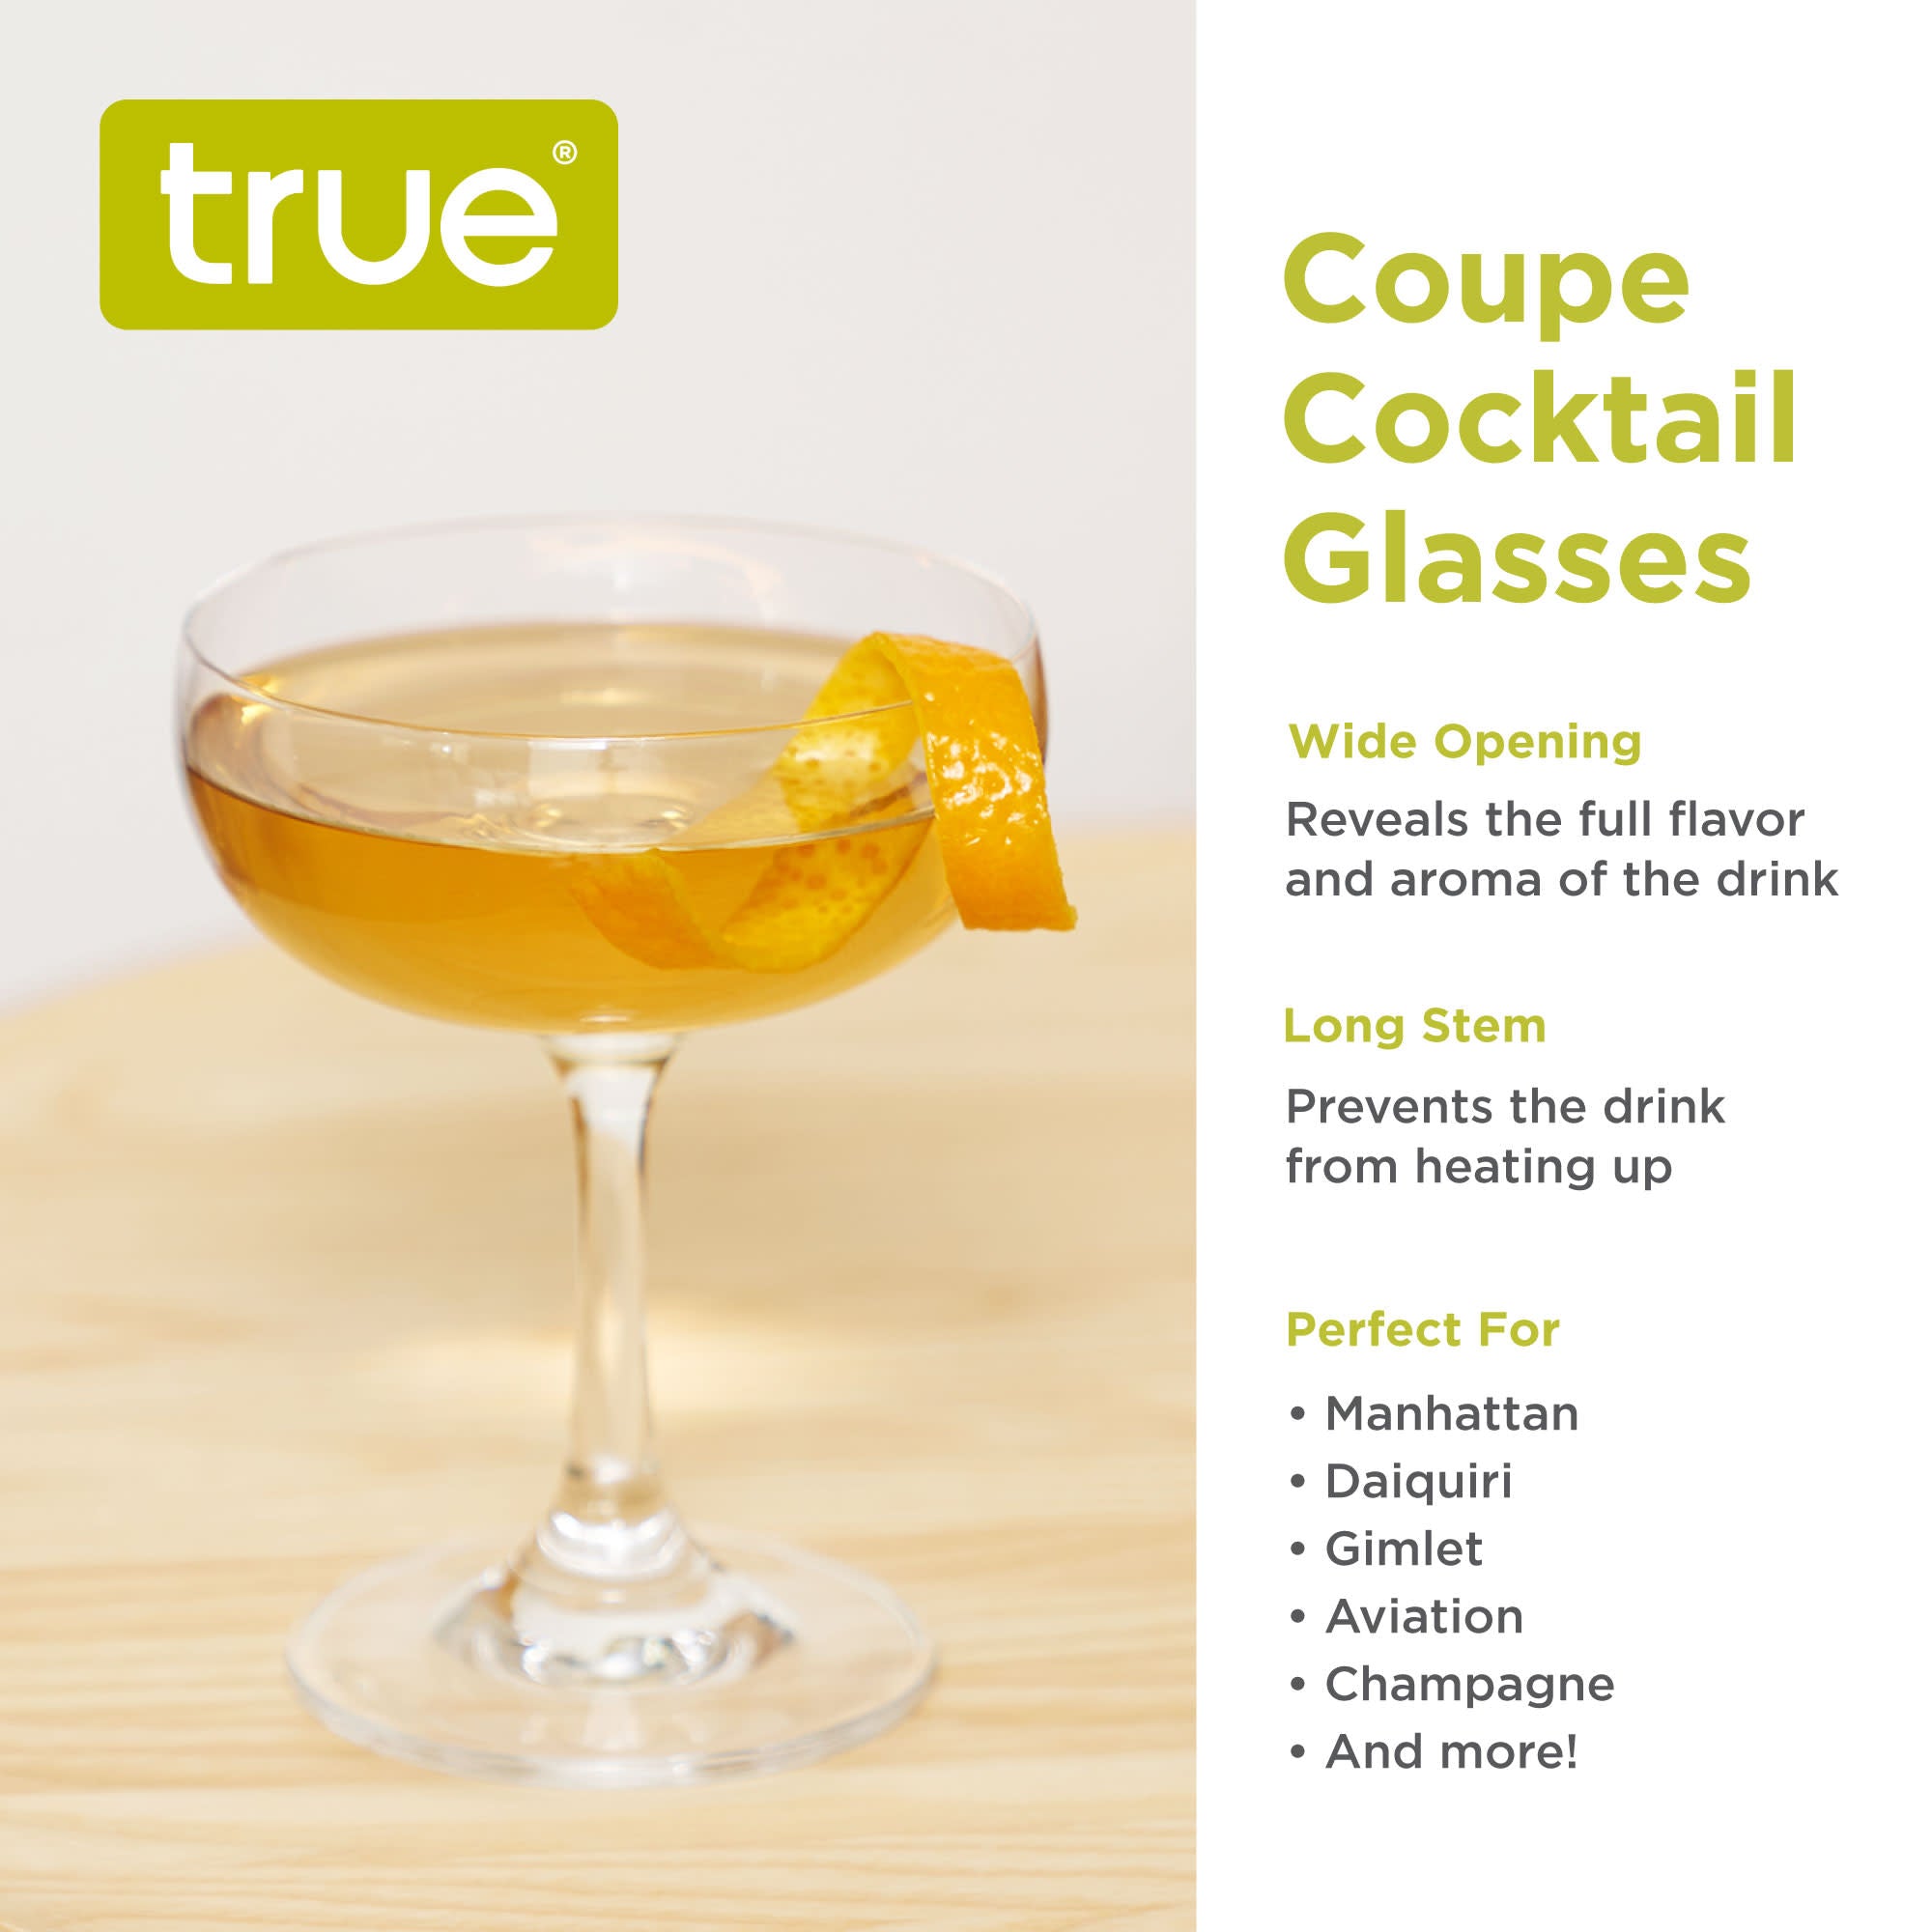 7 oz Coupe Glasses, Set of 4 by True